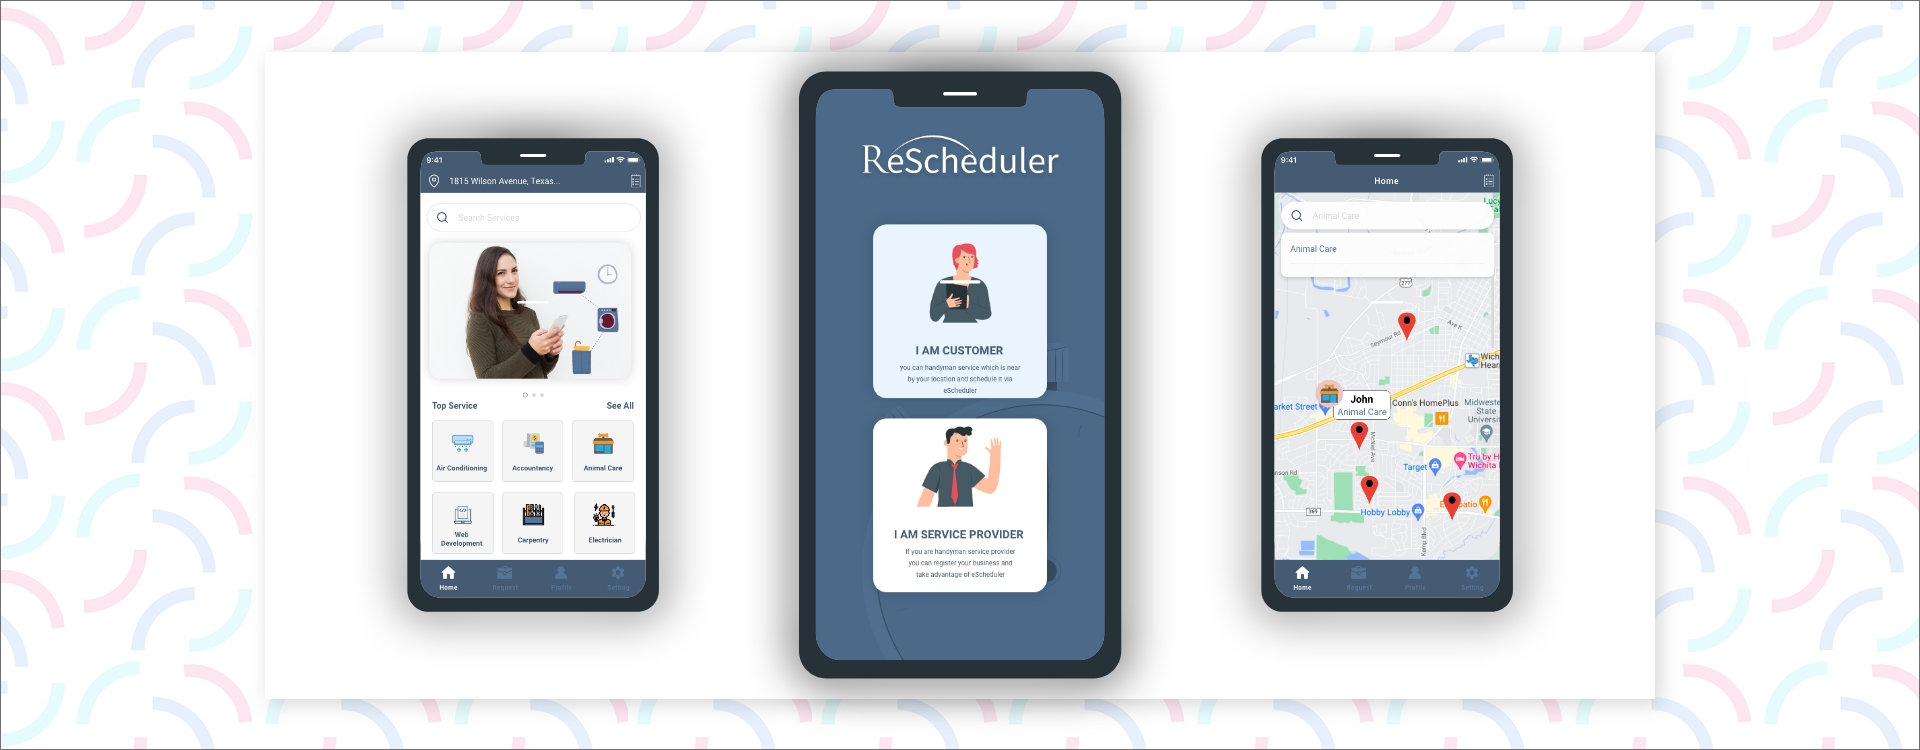 App interface displaying AI/ML features for seamless user connectivity with verified service providers, ensuring trust and convenience